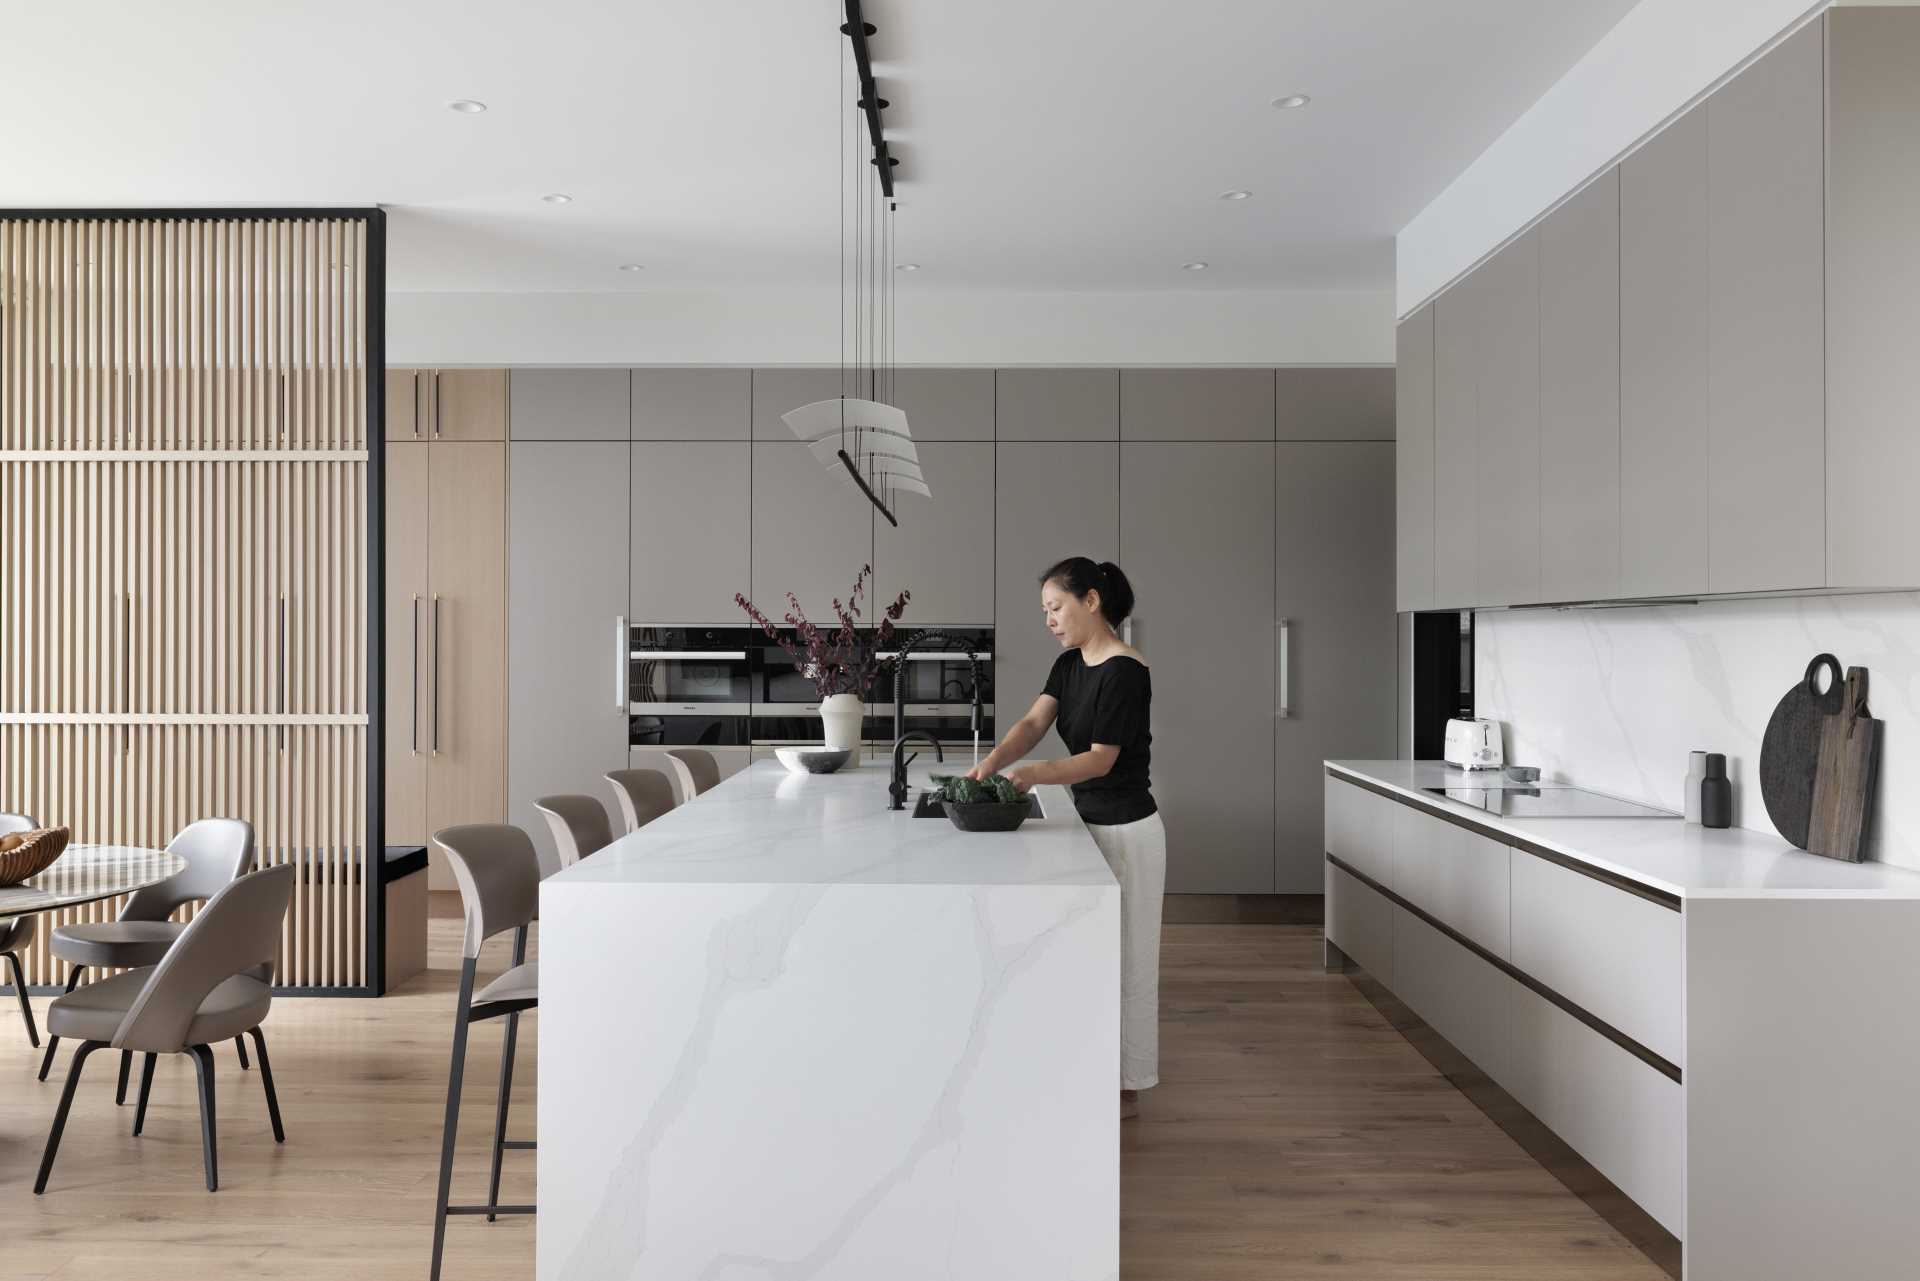 A modern kitchen includes minimalist cabinets and a large island.